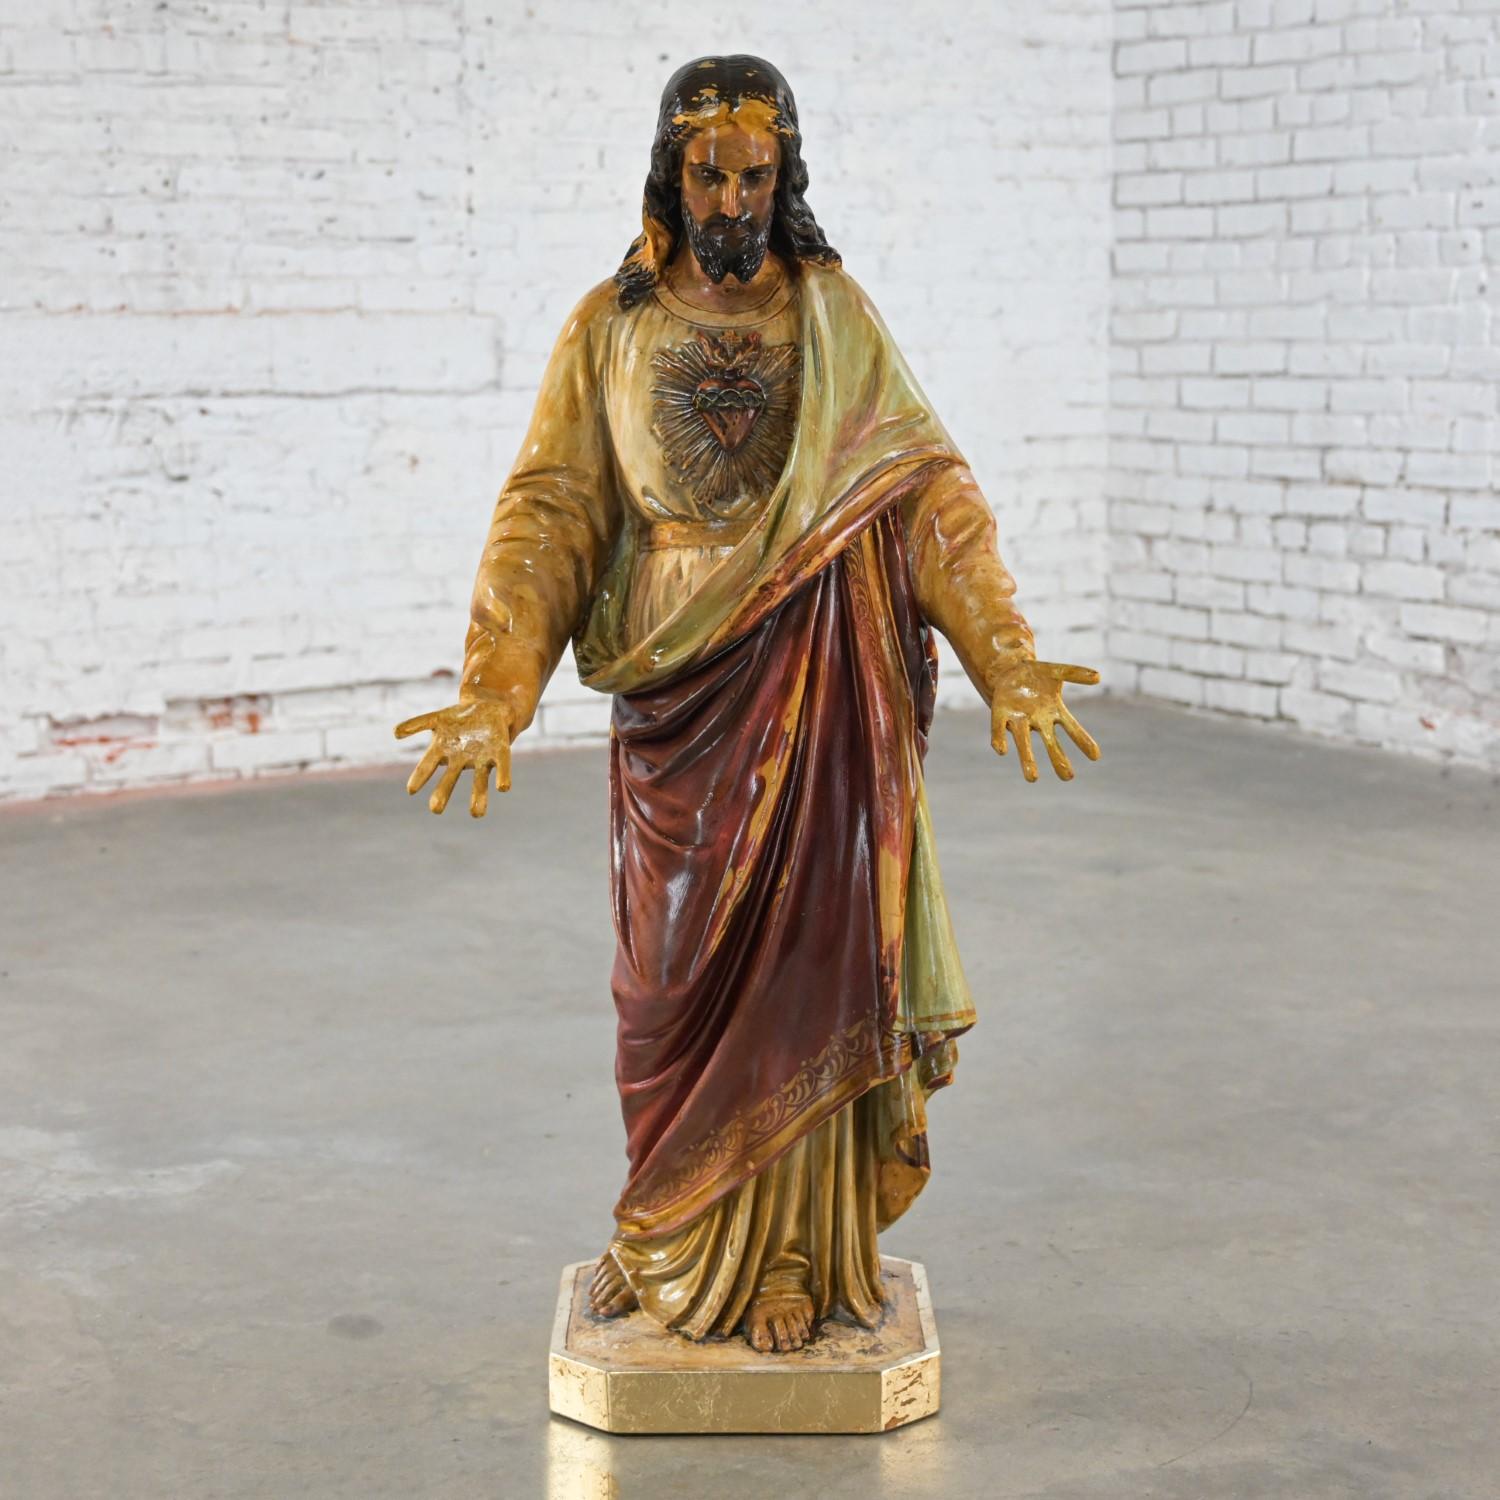 Glorious Late 19th to Early 20th Century Ecclesiastical Religious Art Sacred Heart of Jesus plaster statue sculpture upon a gilded wood base. Beautiful condition, keeping in mind that this is vintage and not new so will have signs of use and wear